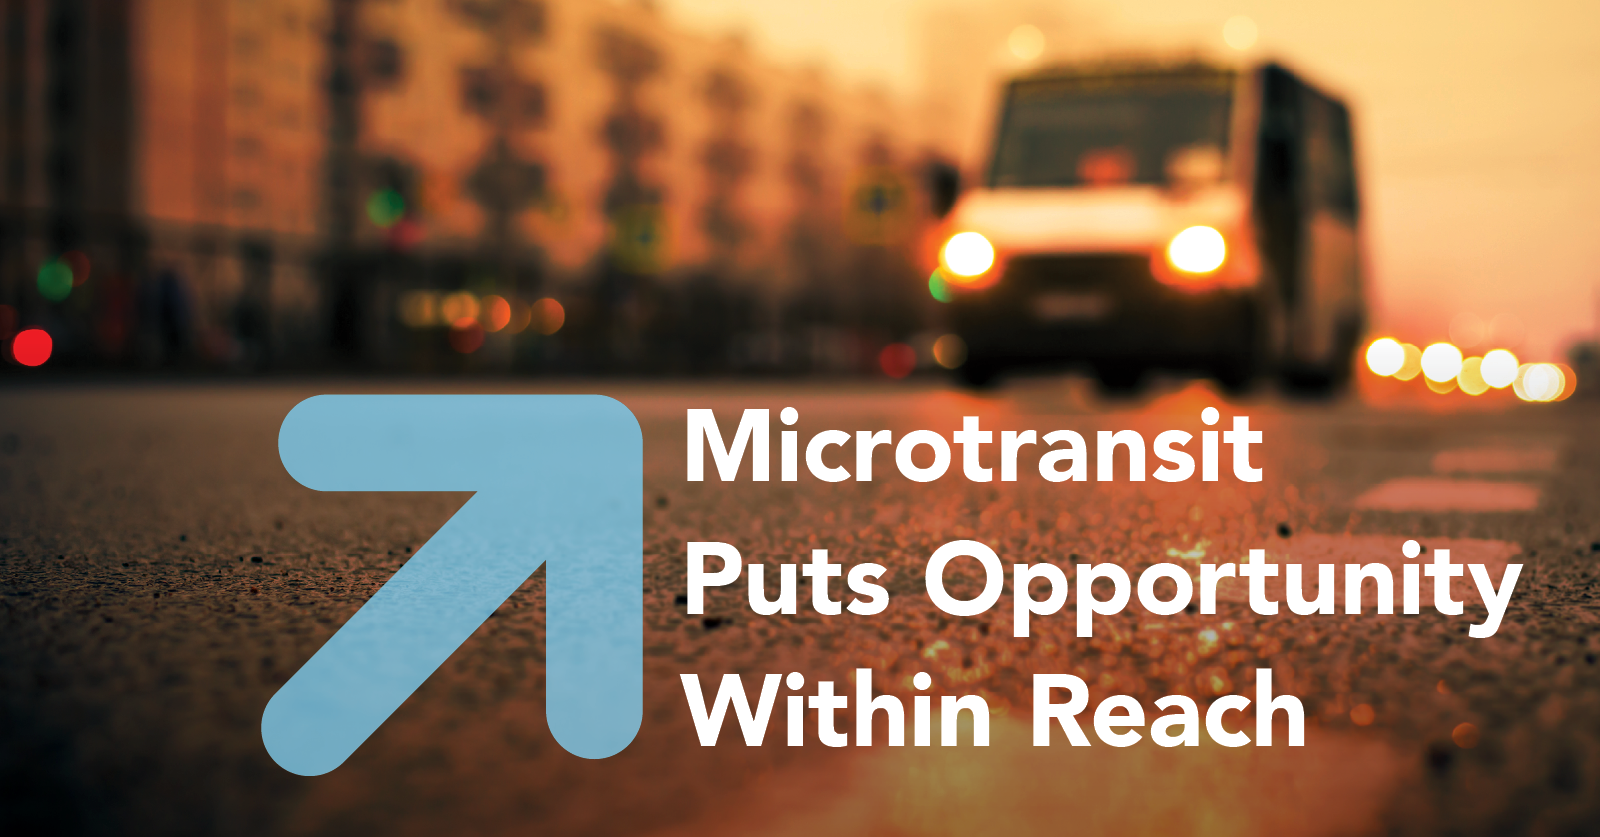 Microtransit Puts Opportunity Within Reach